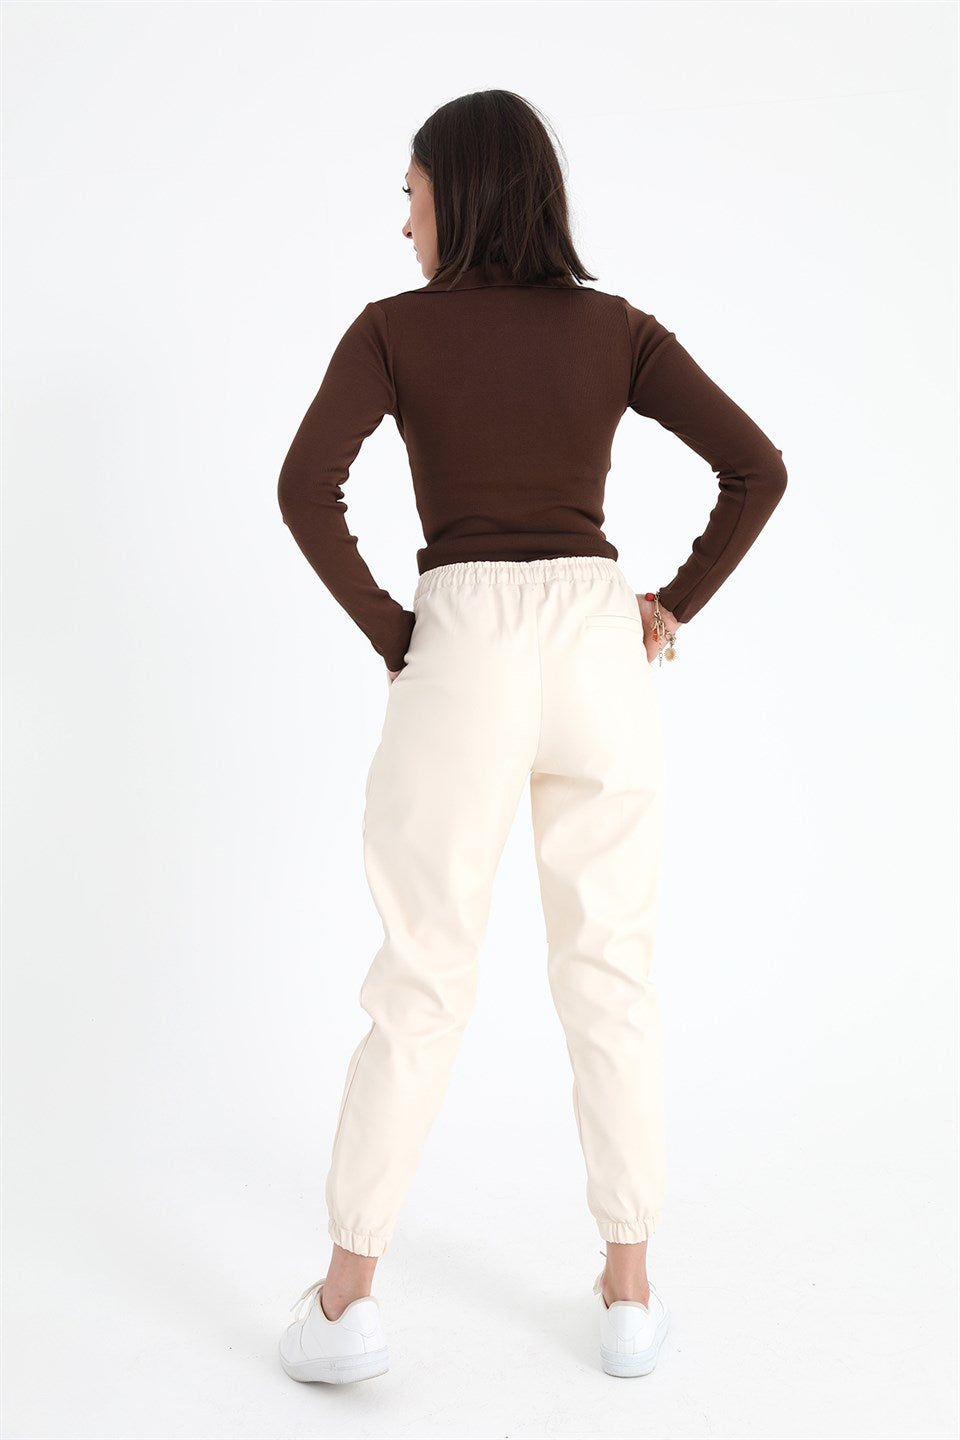 Women's Pleated Leather Pants with Elastic Waist and Legs - Ecru - STREETMODE ™